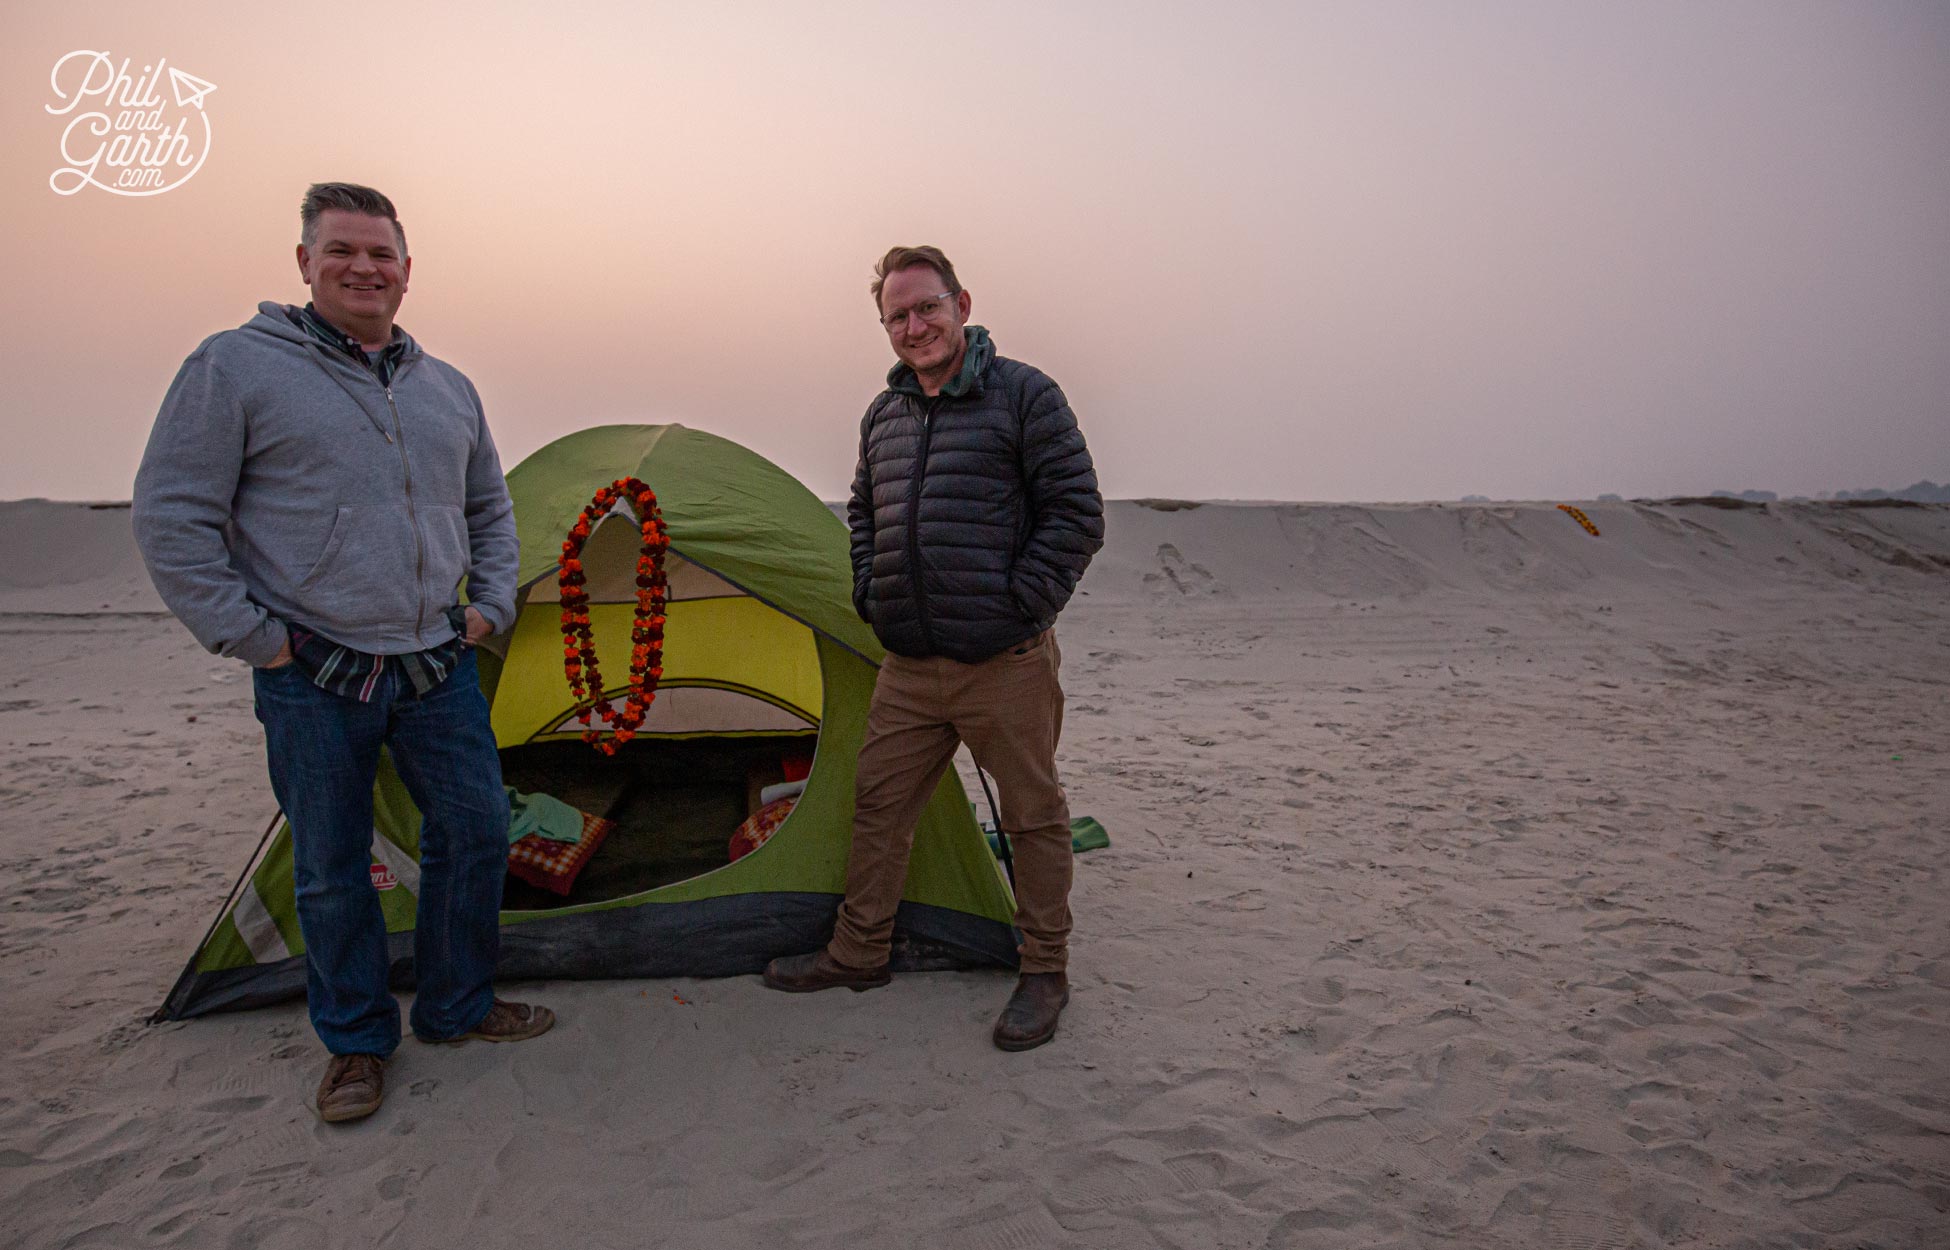 Our tent for the night, on a sandy island right in the middle of the River Ganges